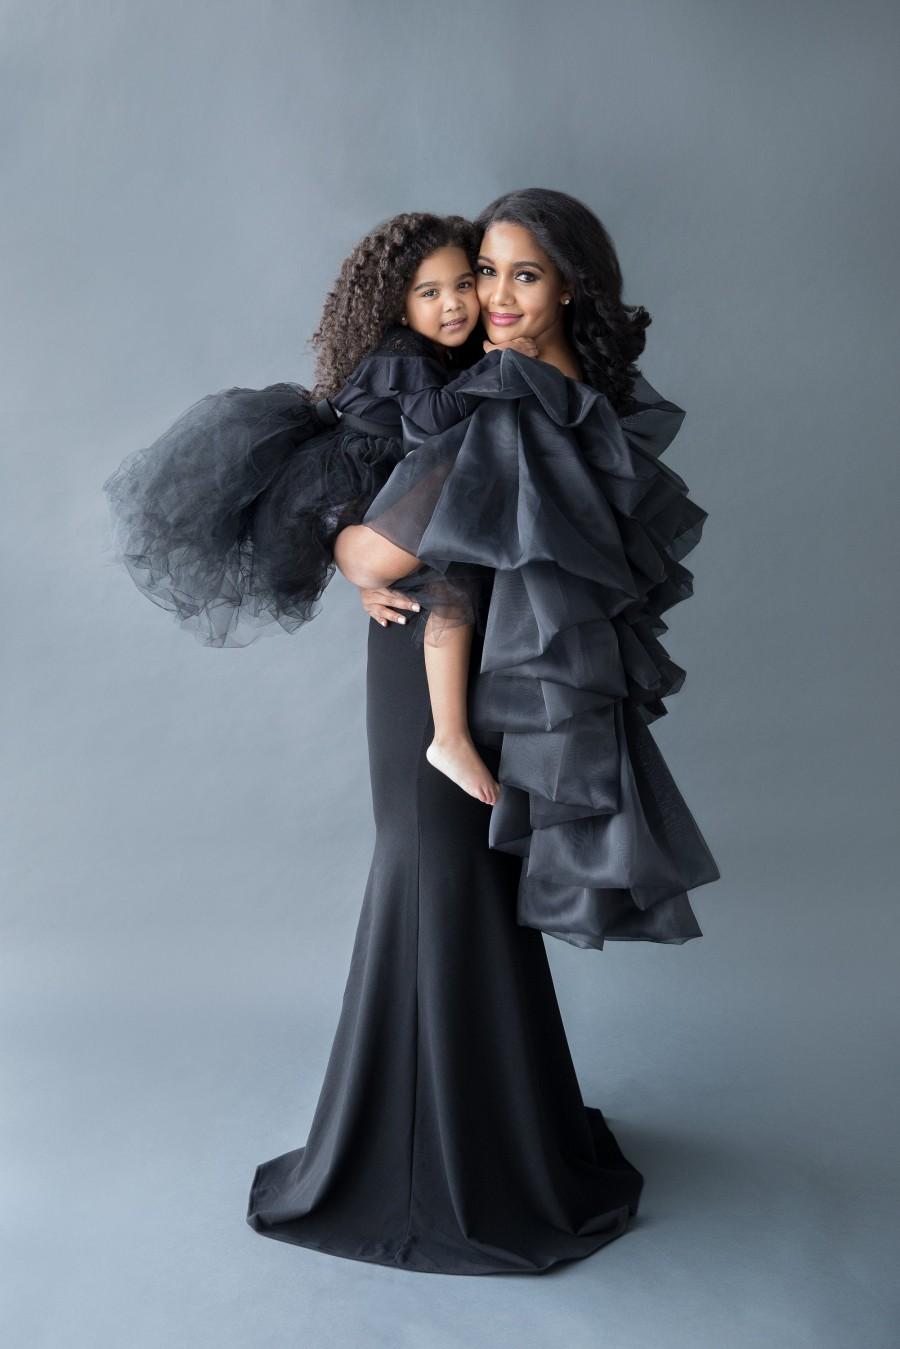 Hochzeit - Black Engagement Dress for Photo shoots and Photography Gown with ruffle cape dramatic dress mermaid style - The Patrician Cape Gown